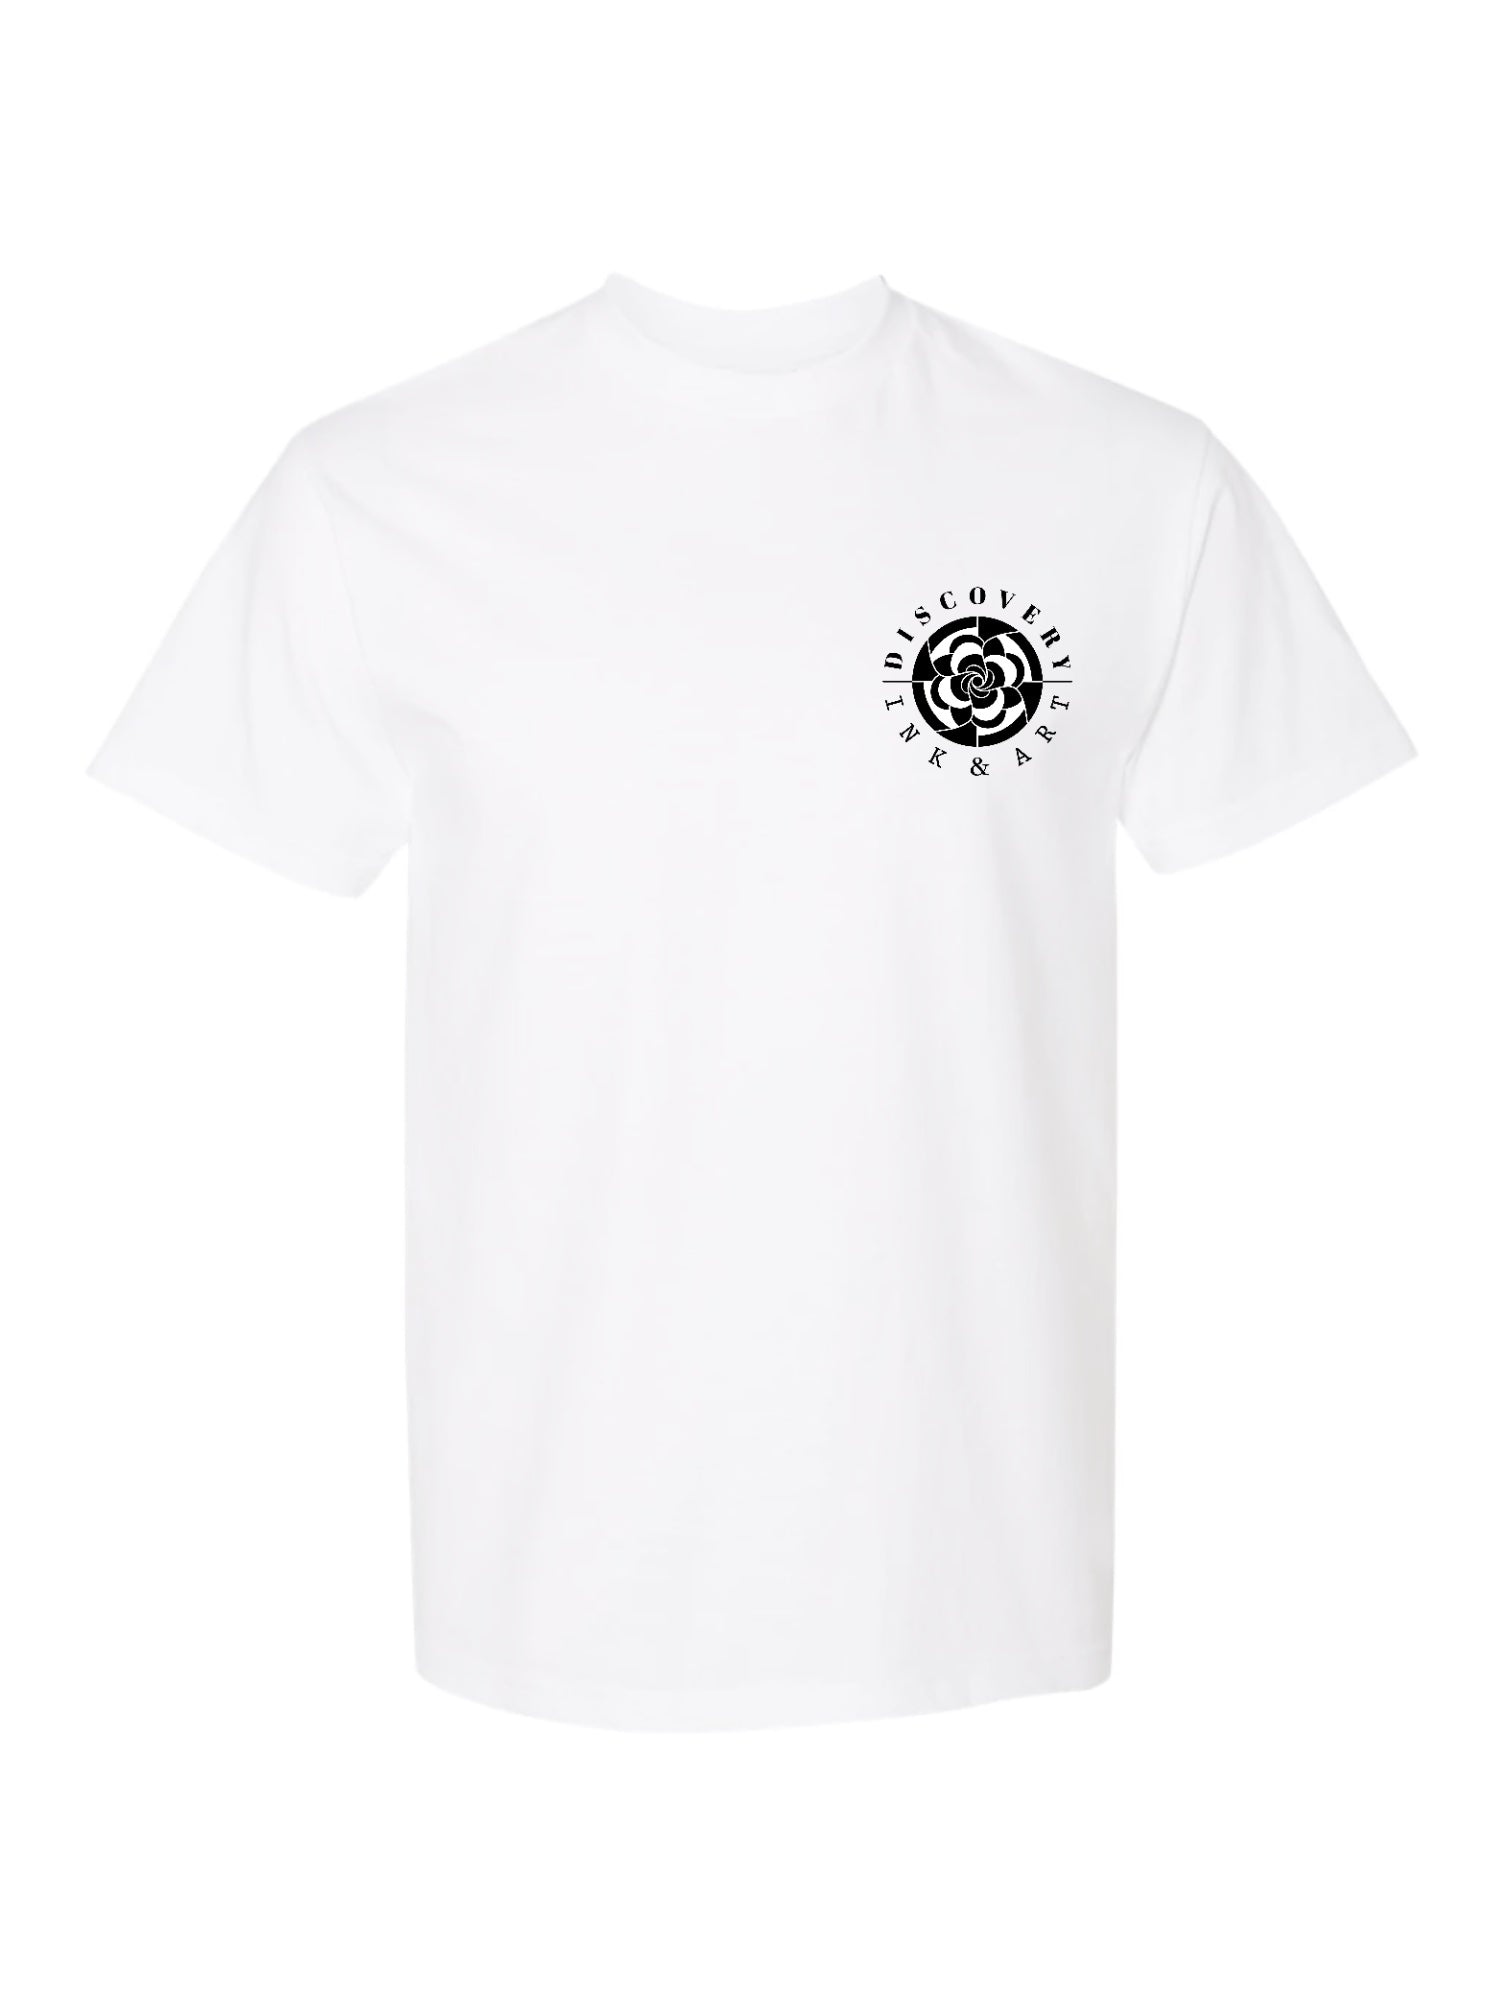 White tee with Discovery Ink & Art logo